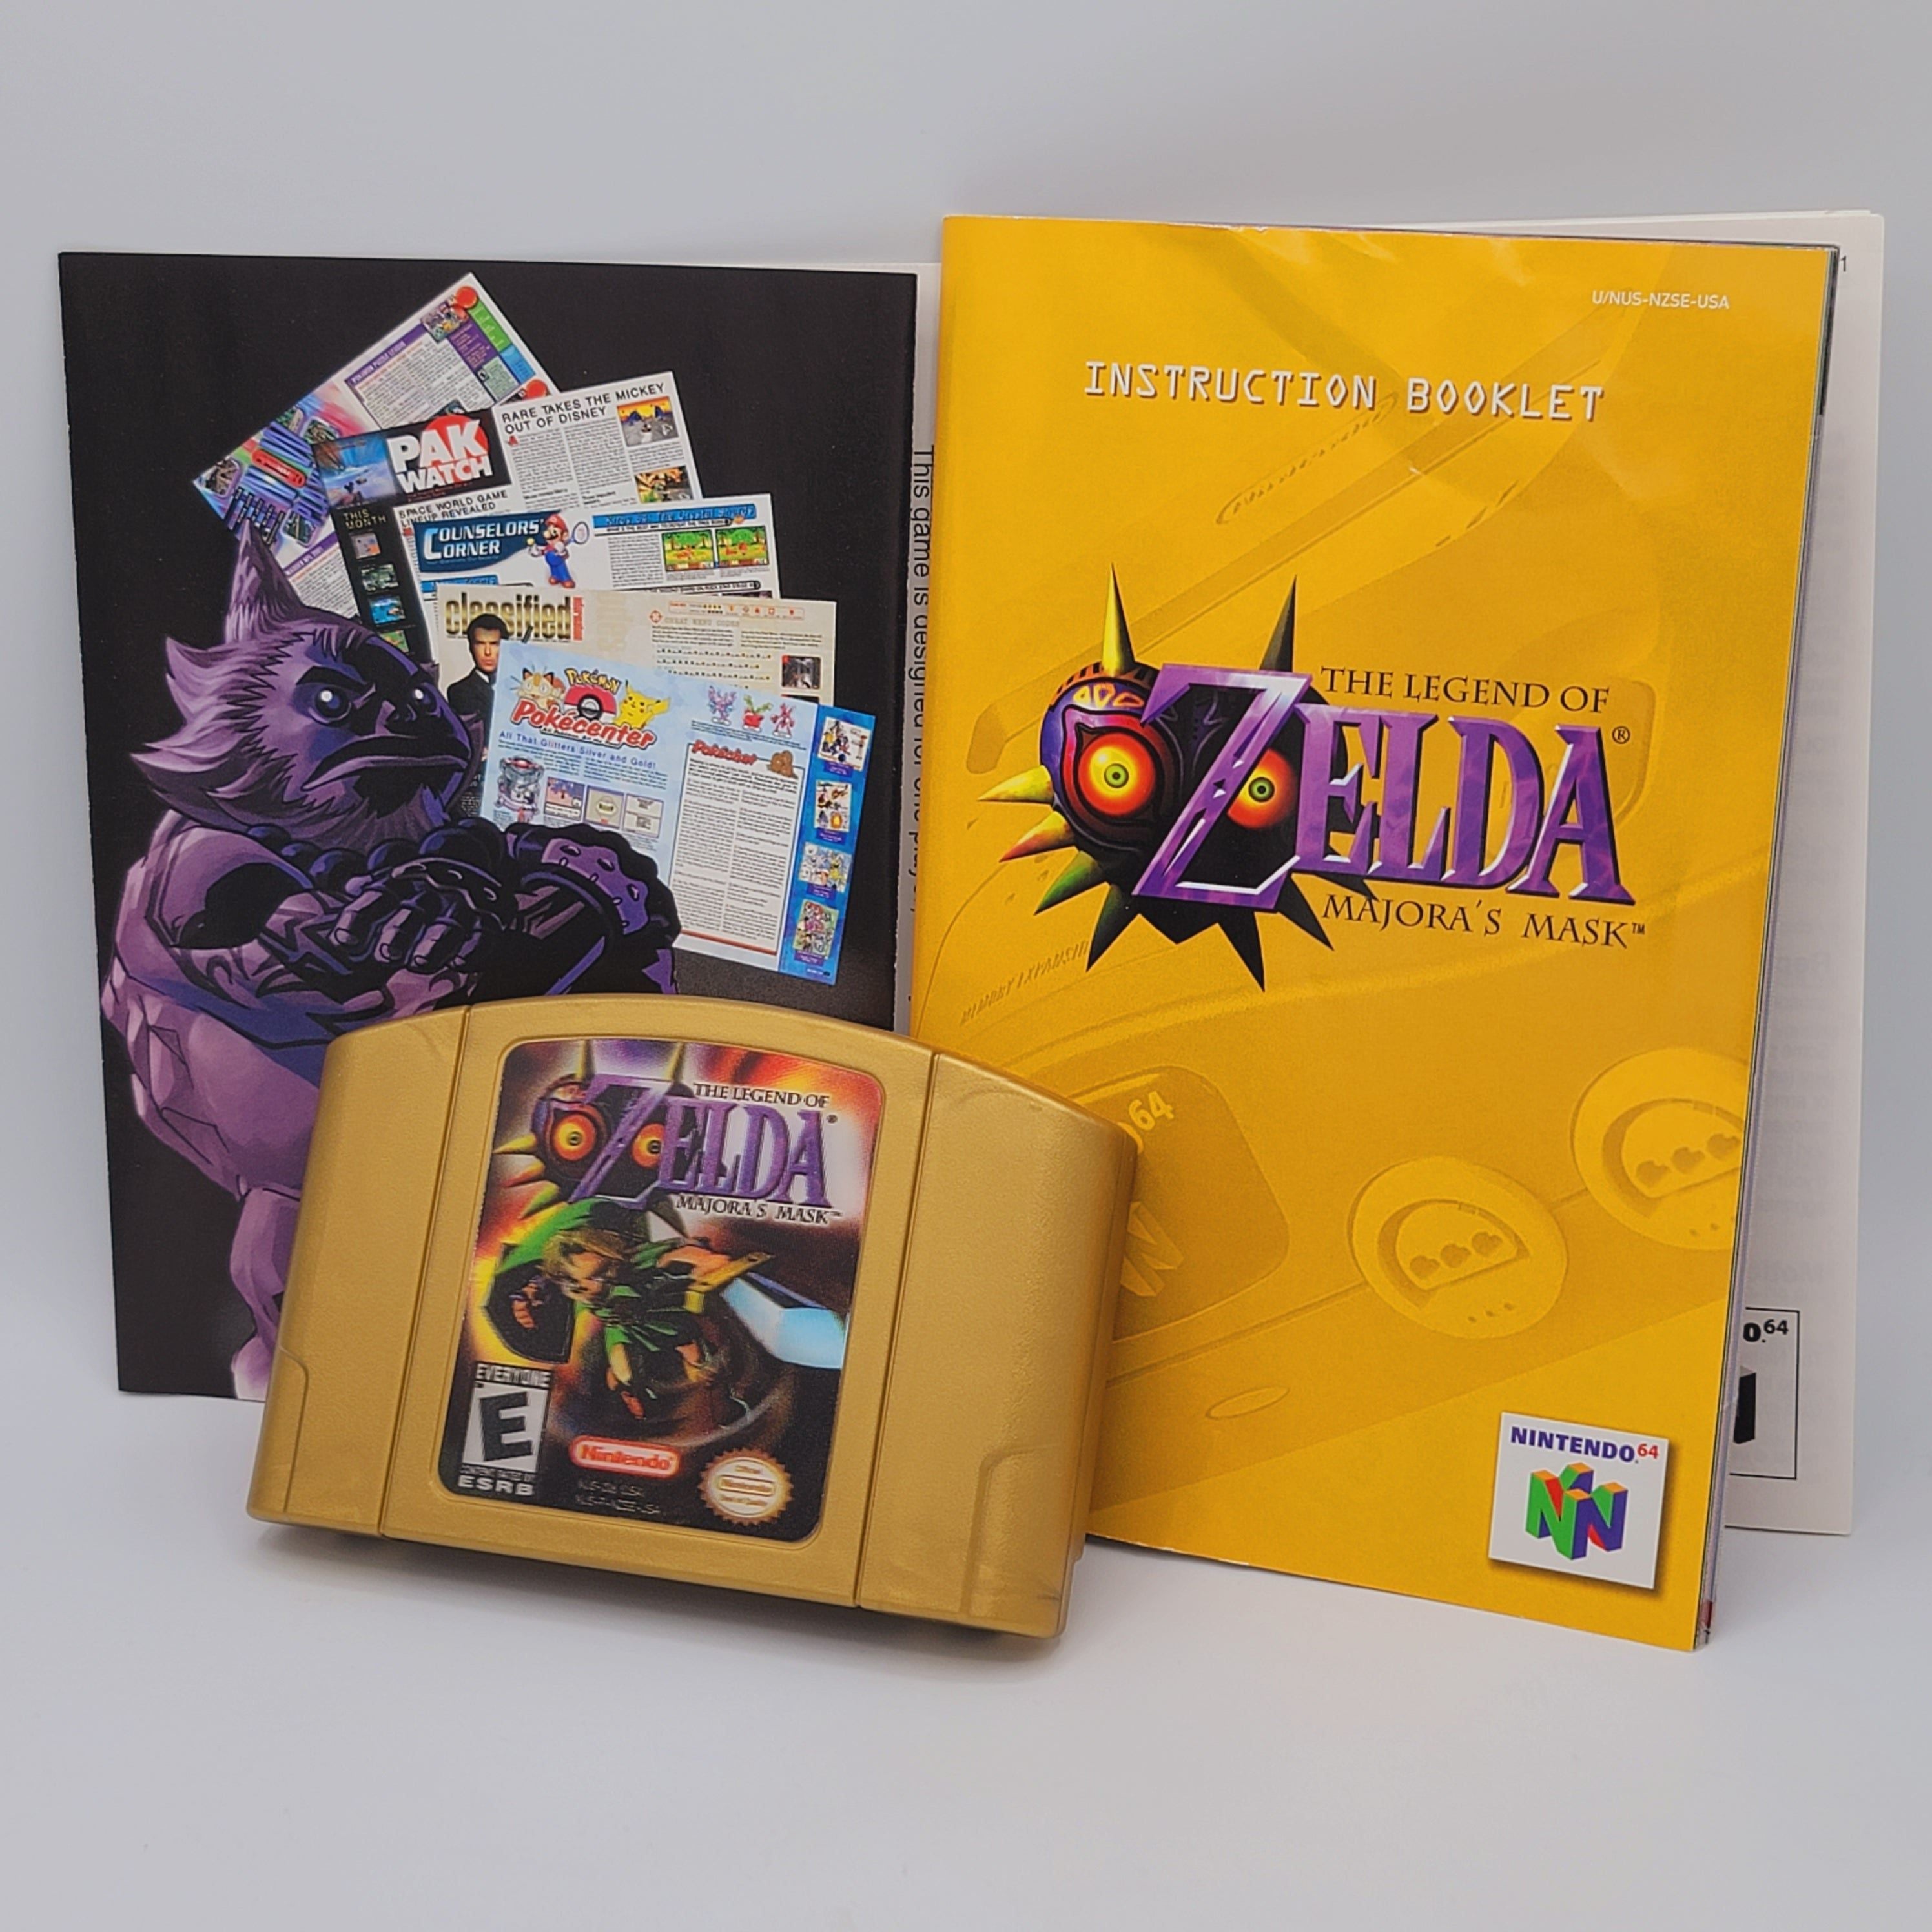 N64 - The Legend of Zelda Majora's Mask Collector's Edition (Complete in Box / A- / With Manual)